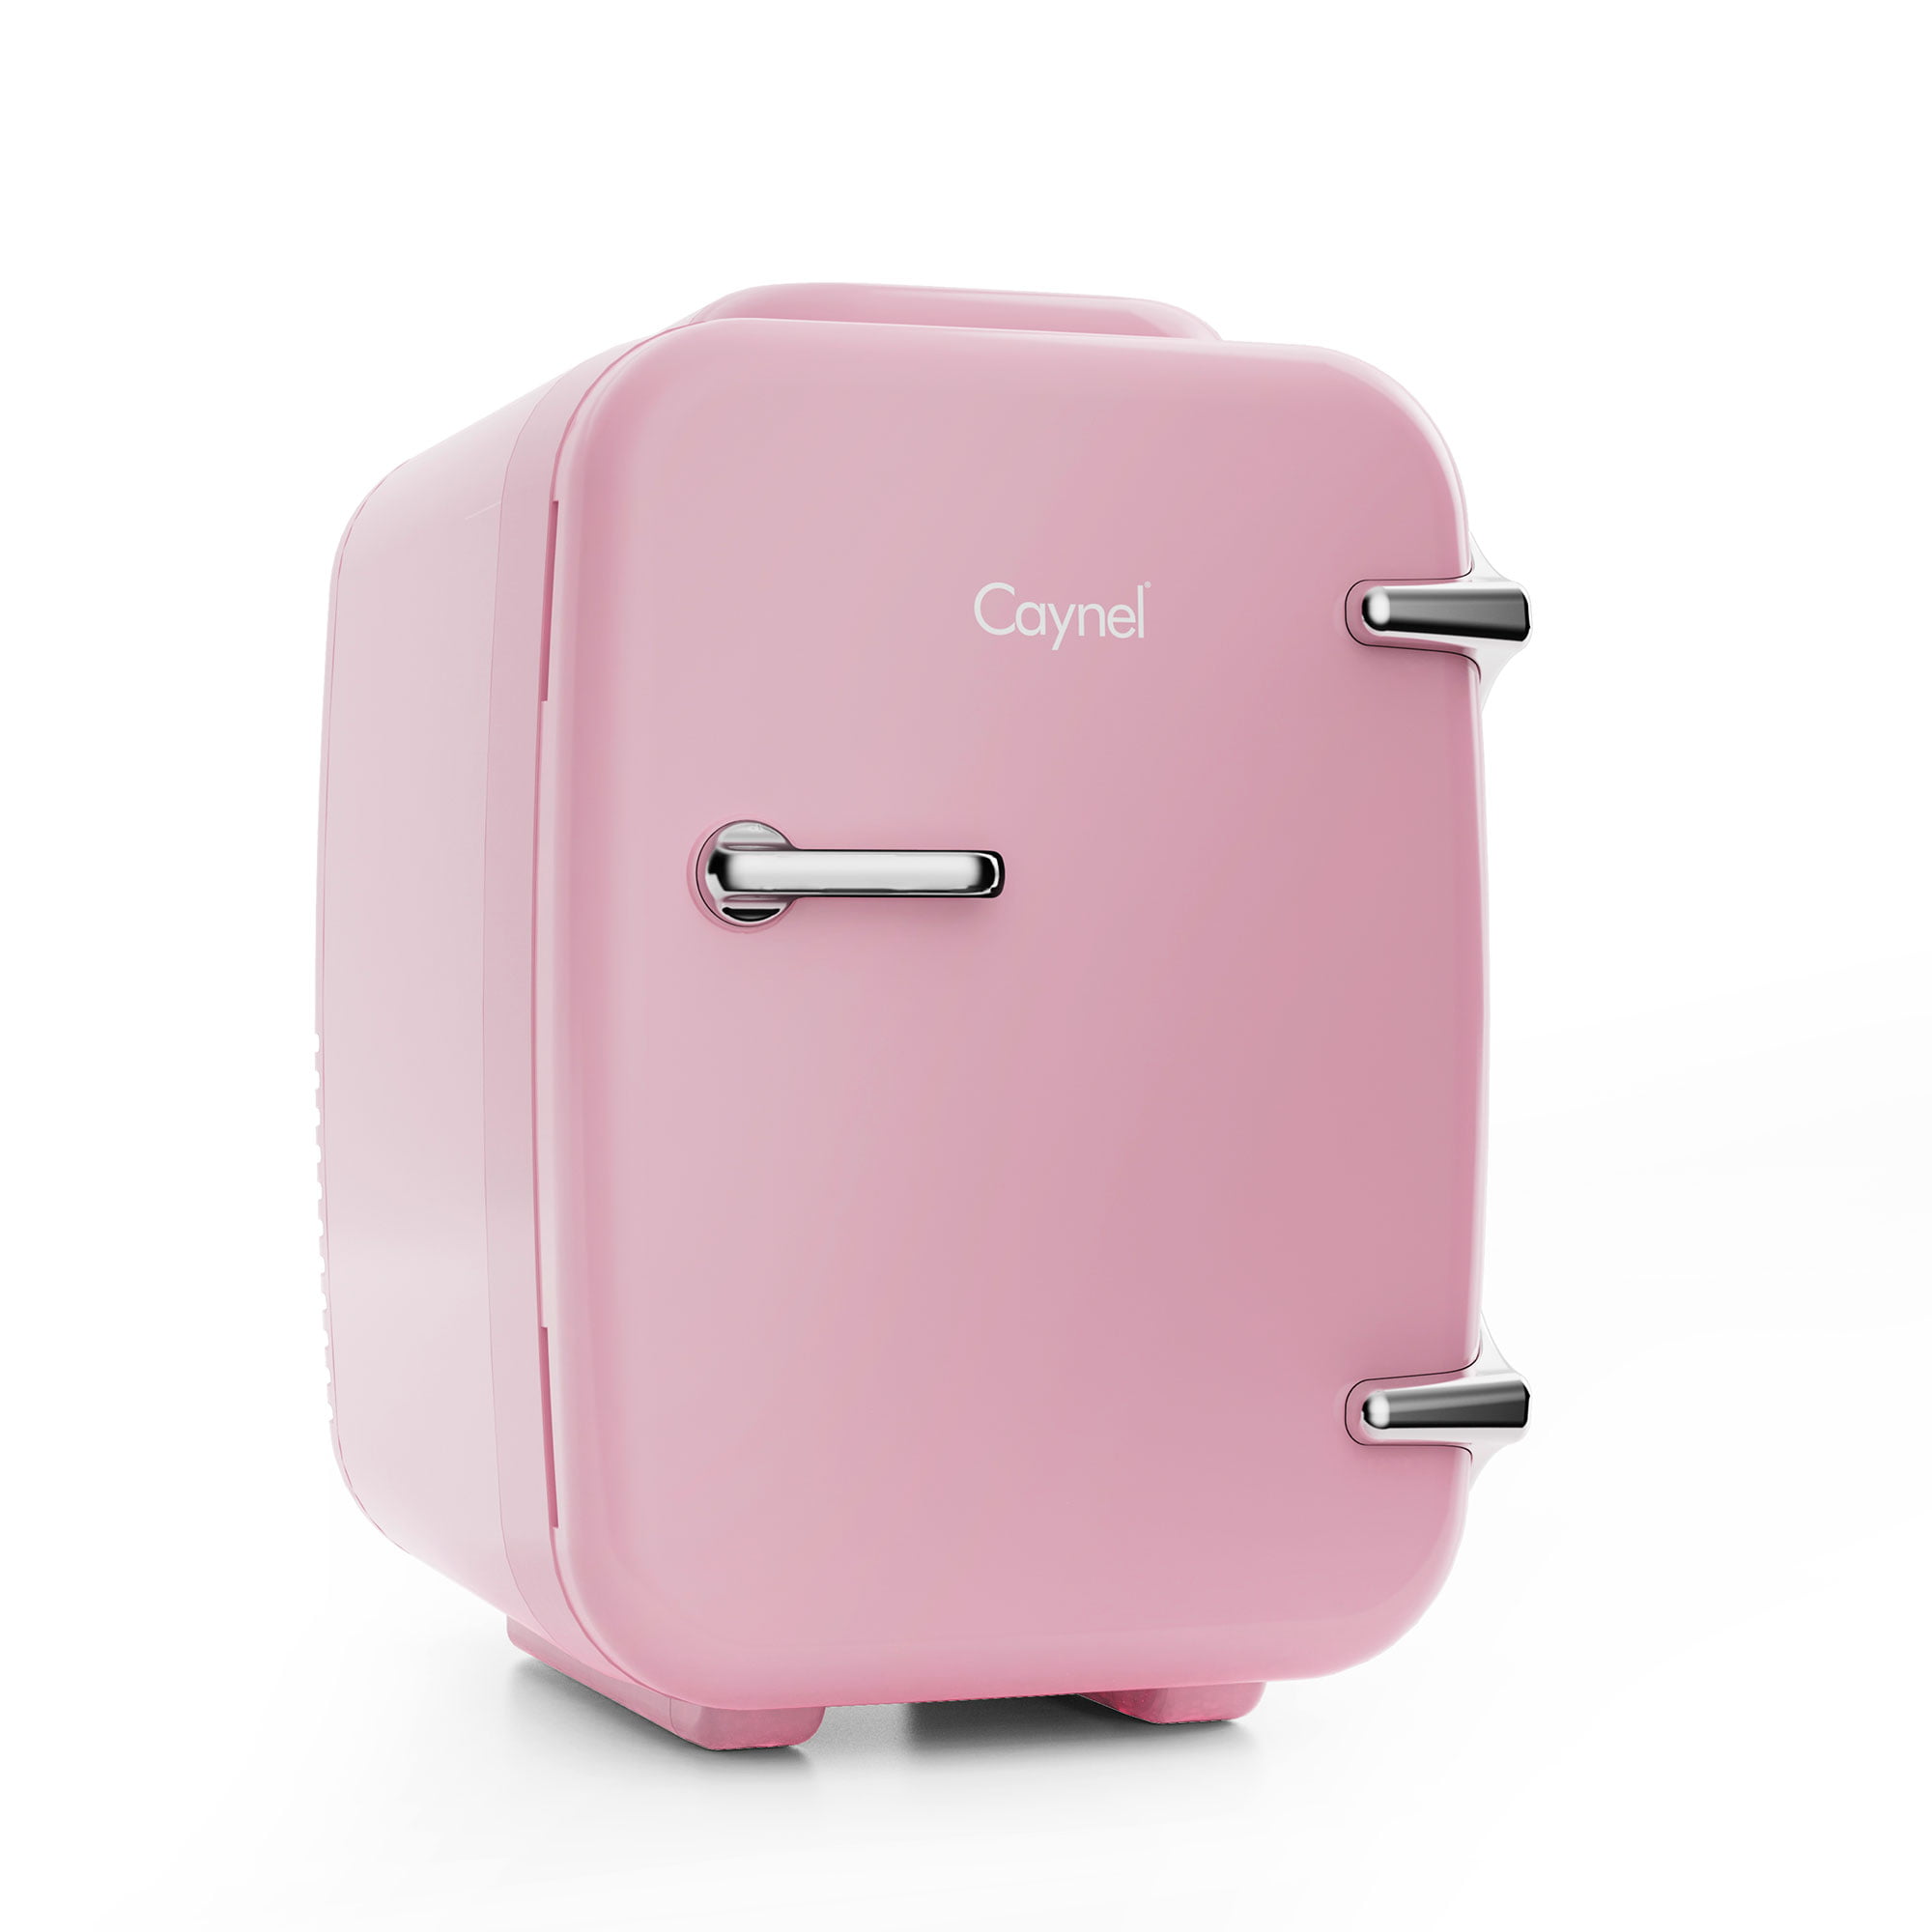 Caynel 4-Liter/6 Can Portable Mini Fridge with Warming Function, Pink ...